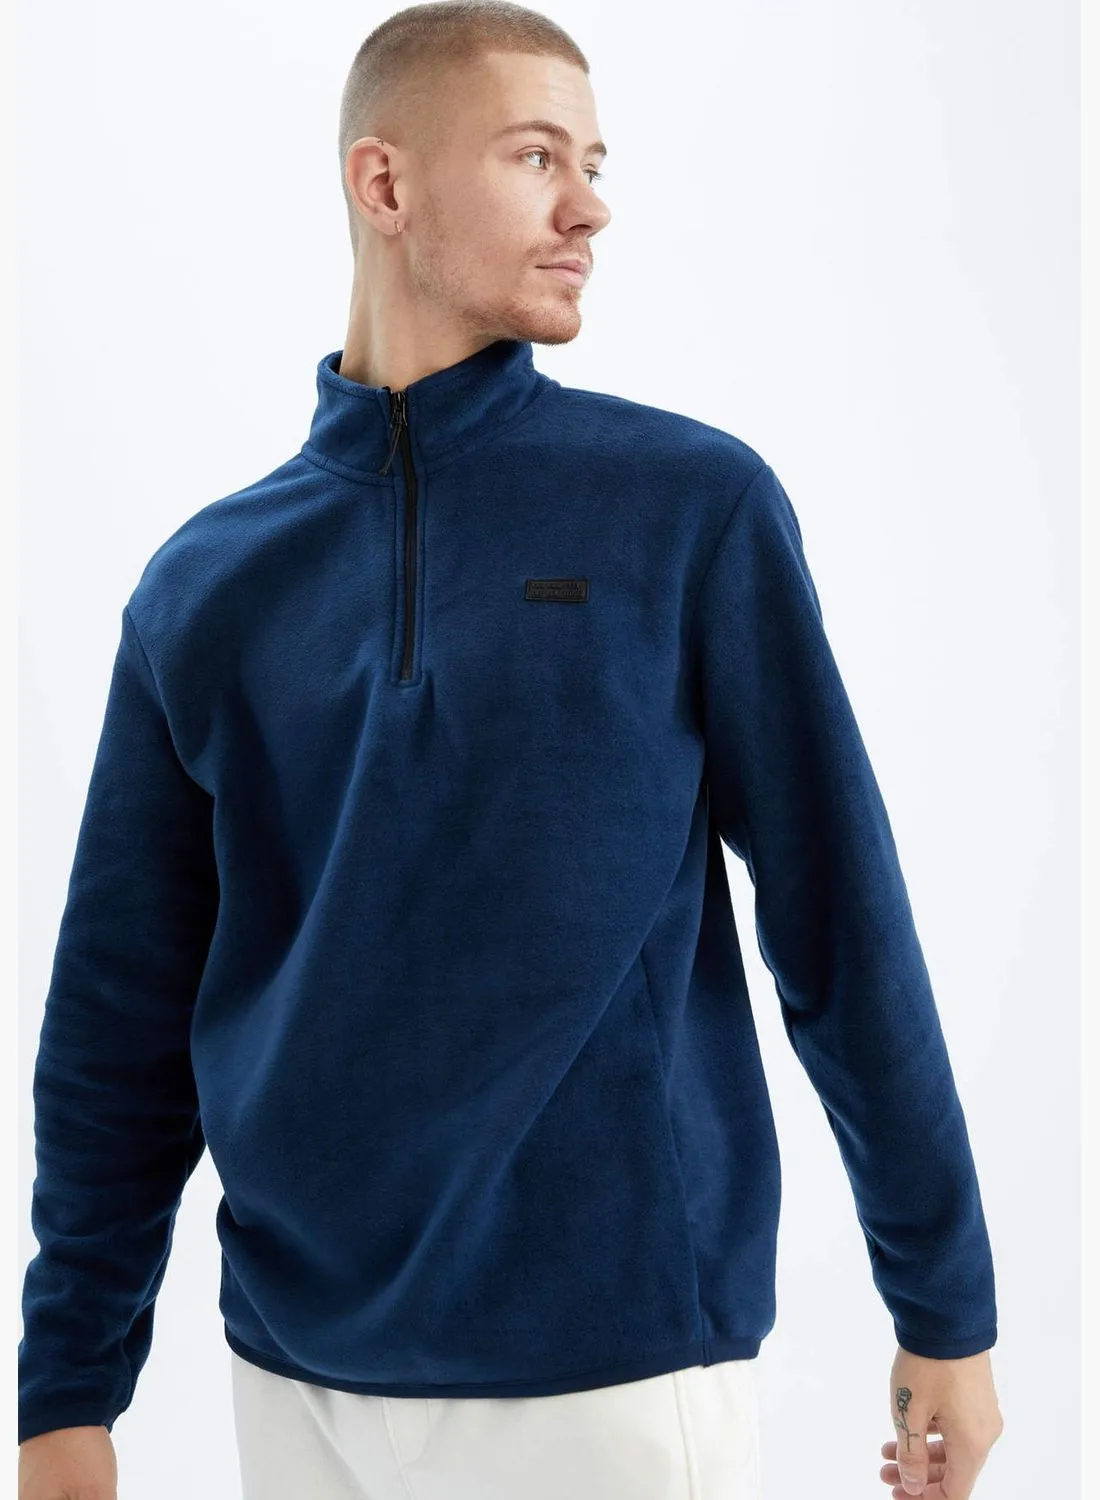 DeFacto Man Stand- Up Collar Knitted Sweatshirt